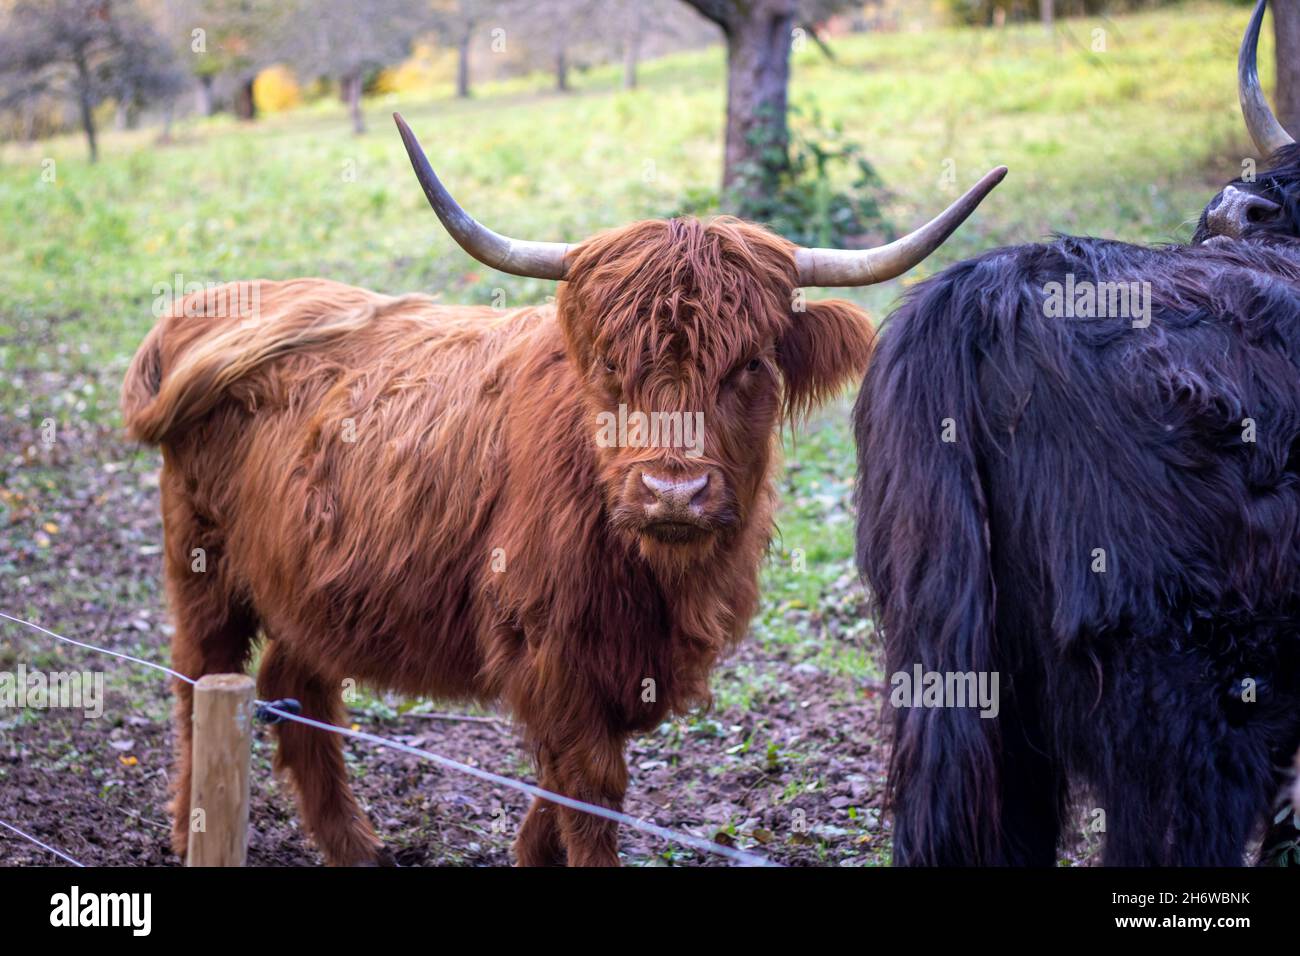 scottish highland cattles with brown and dark fur care for vegetation on a meadow in a nature reserve in southern germany Stock Photo